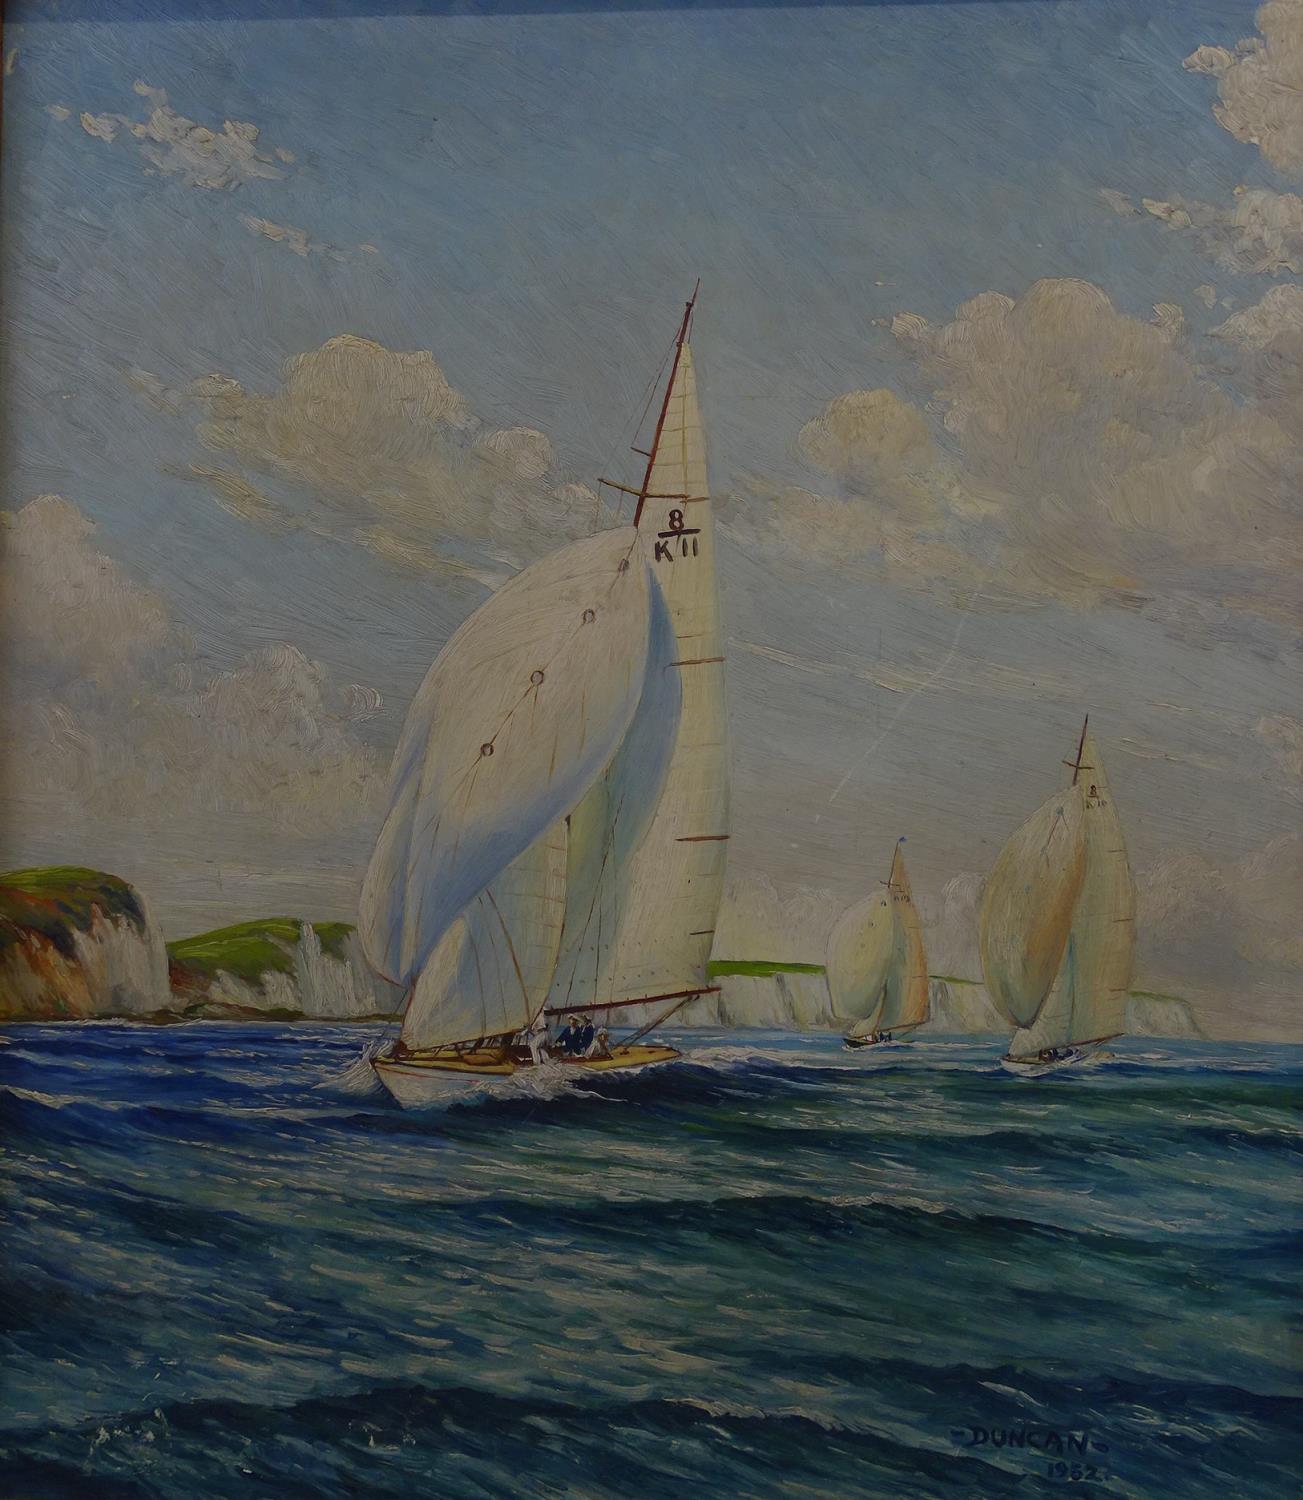 Duncan 1952 Marine School Oil on board Yachting of the white cliffs Signed lower 22 x 36"" (60.1 x